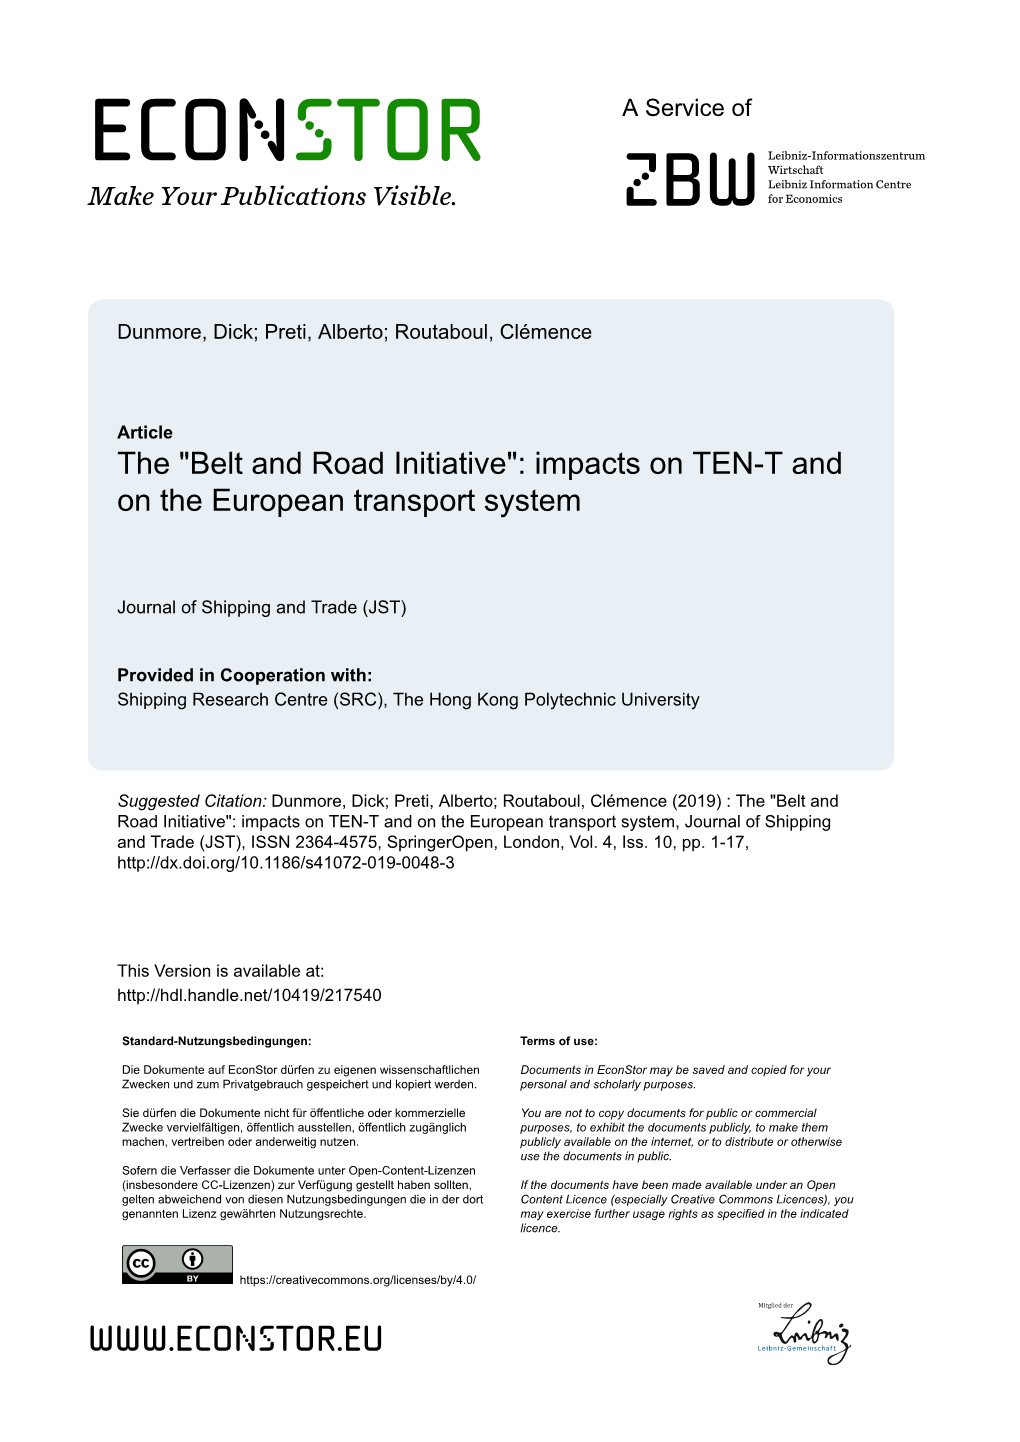 Belt and Road Initiative": Impacts on TEN-T and on the European Transport System